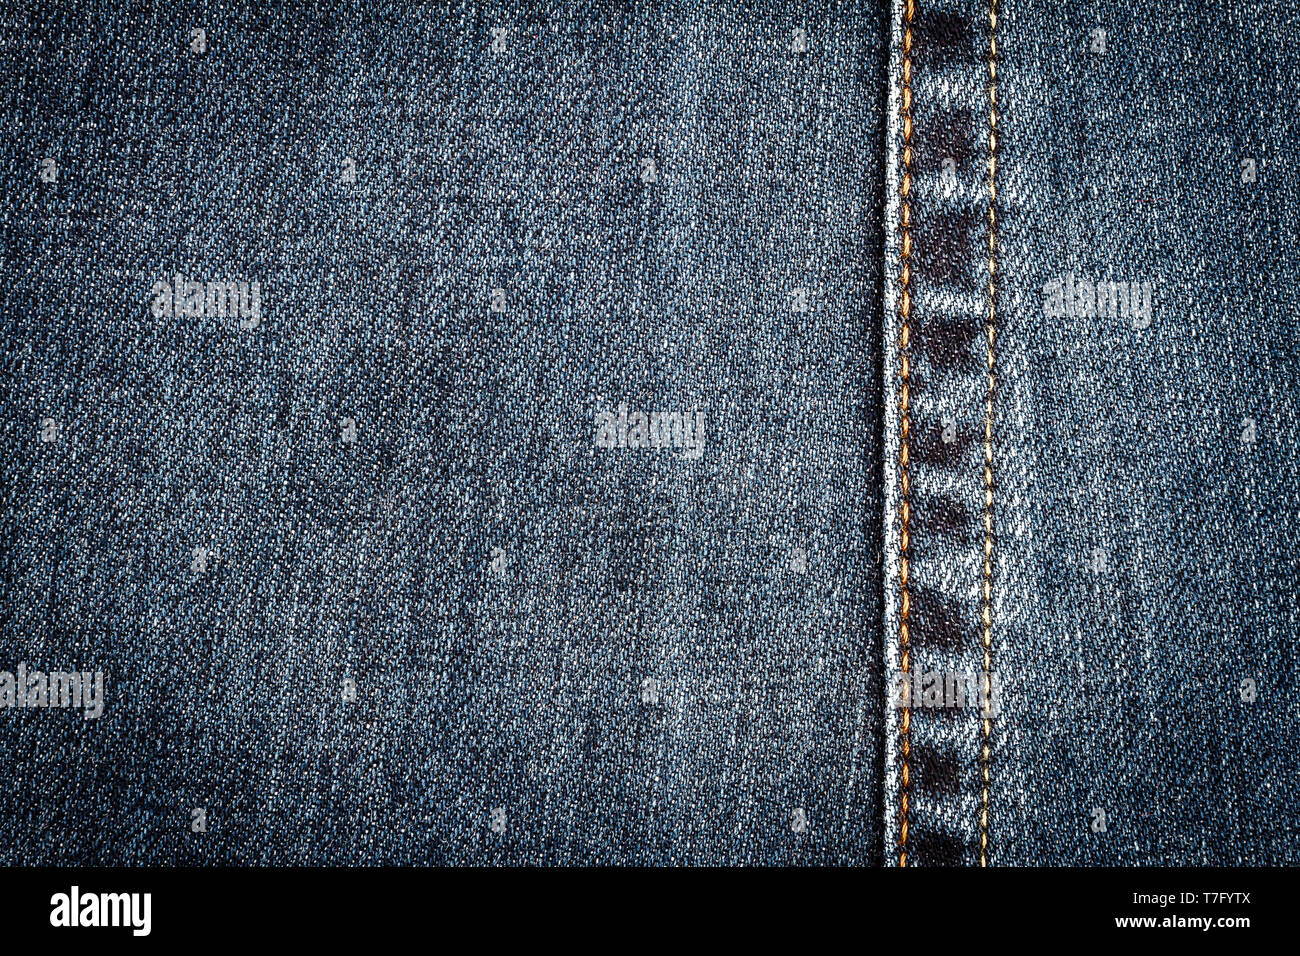 Black jeans texture. Denim jeans fabric background with a seam Stock ...